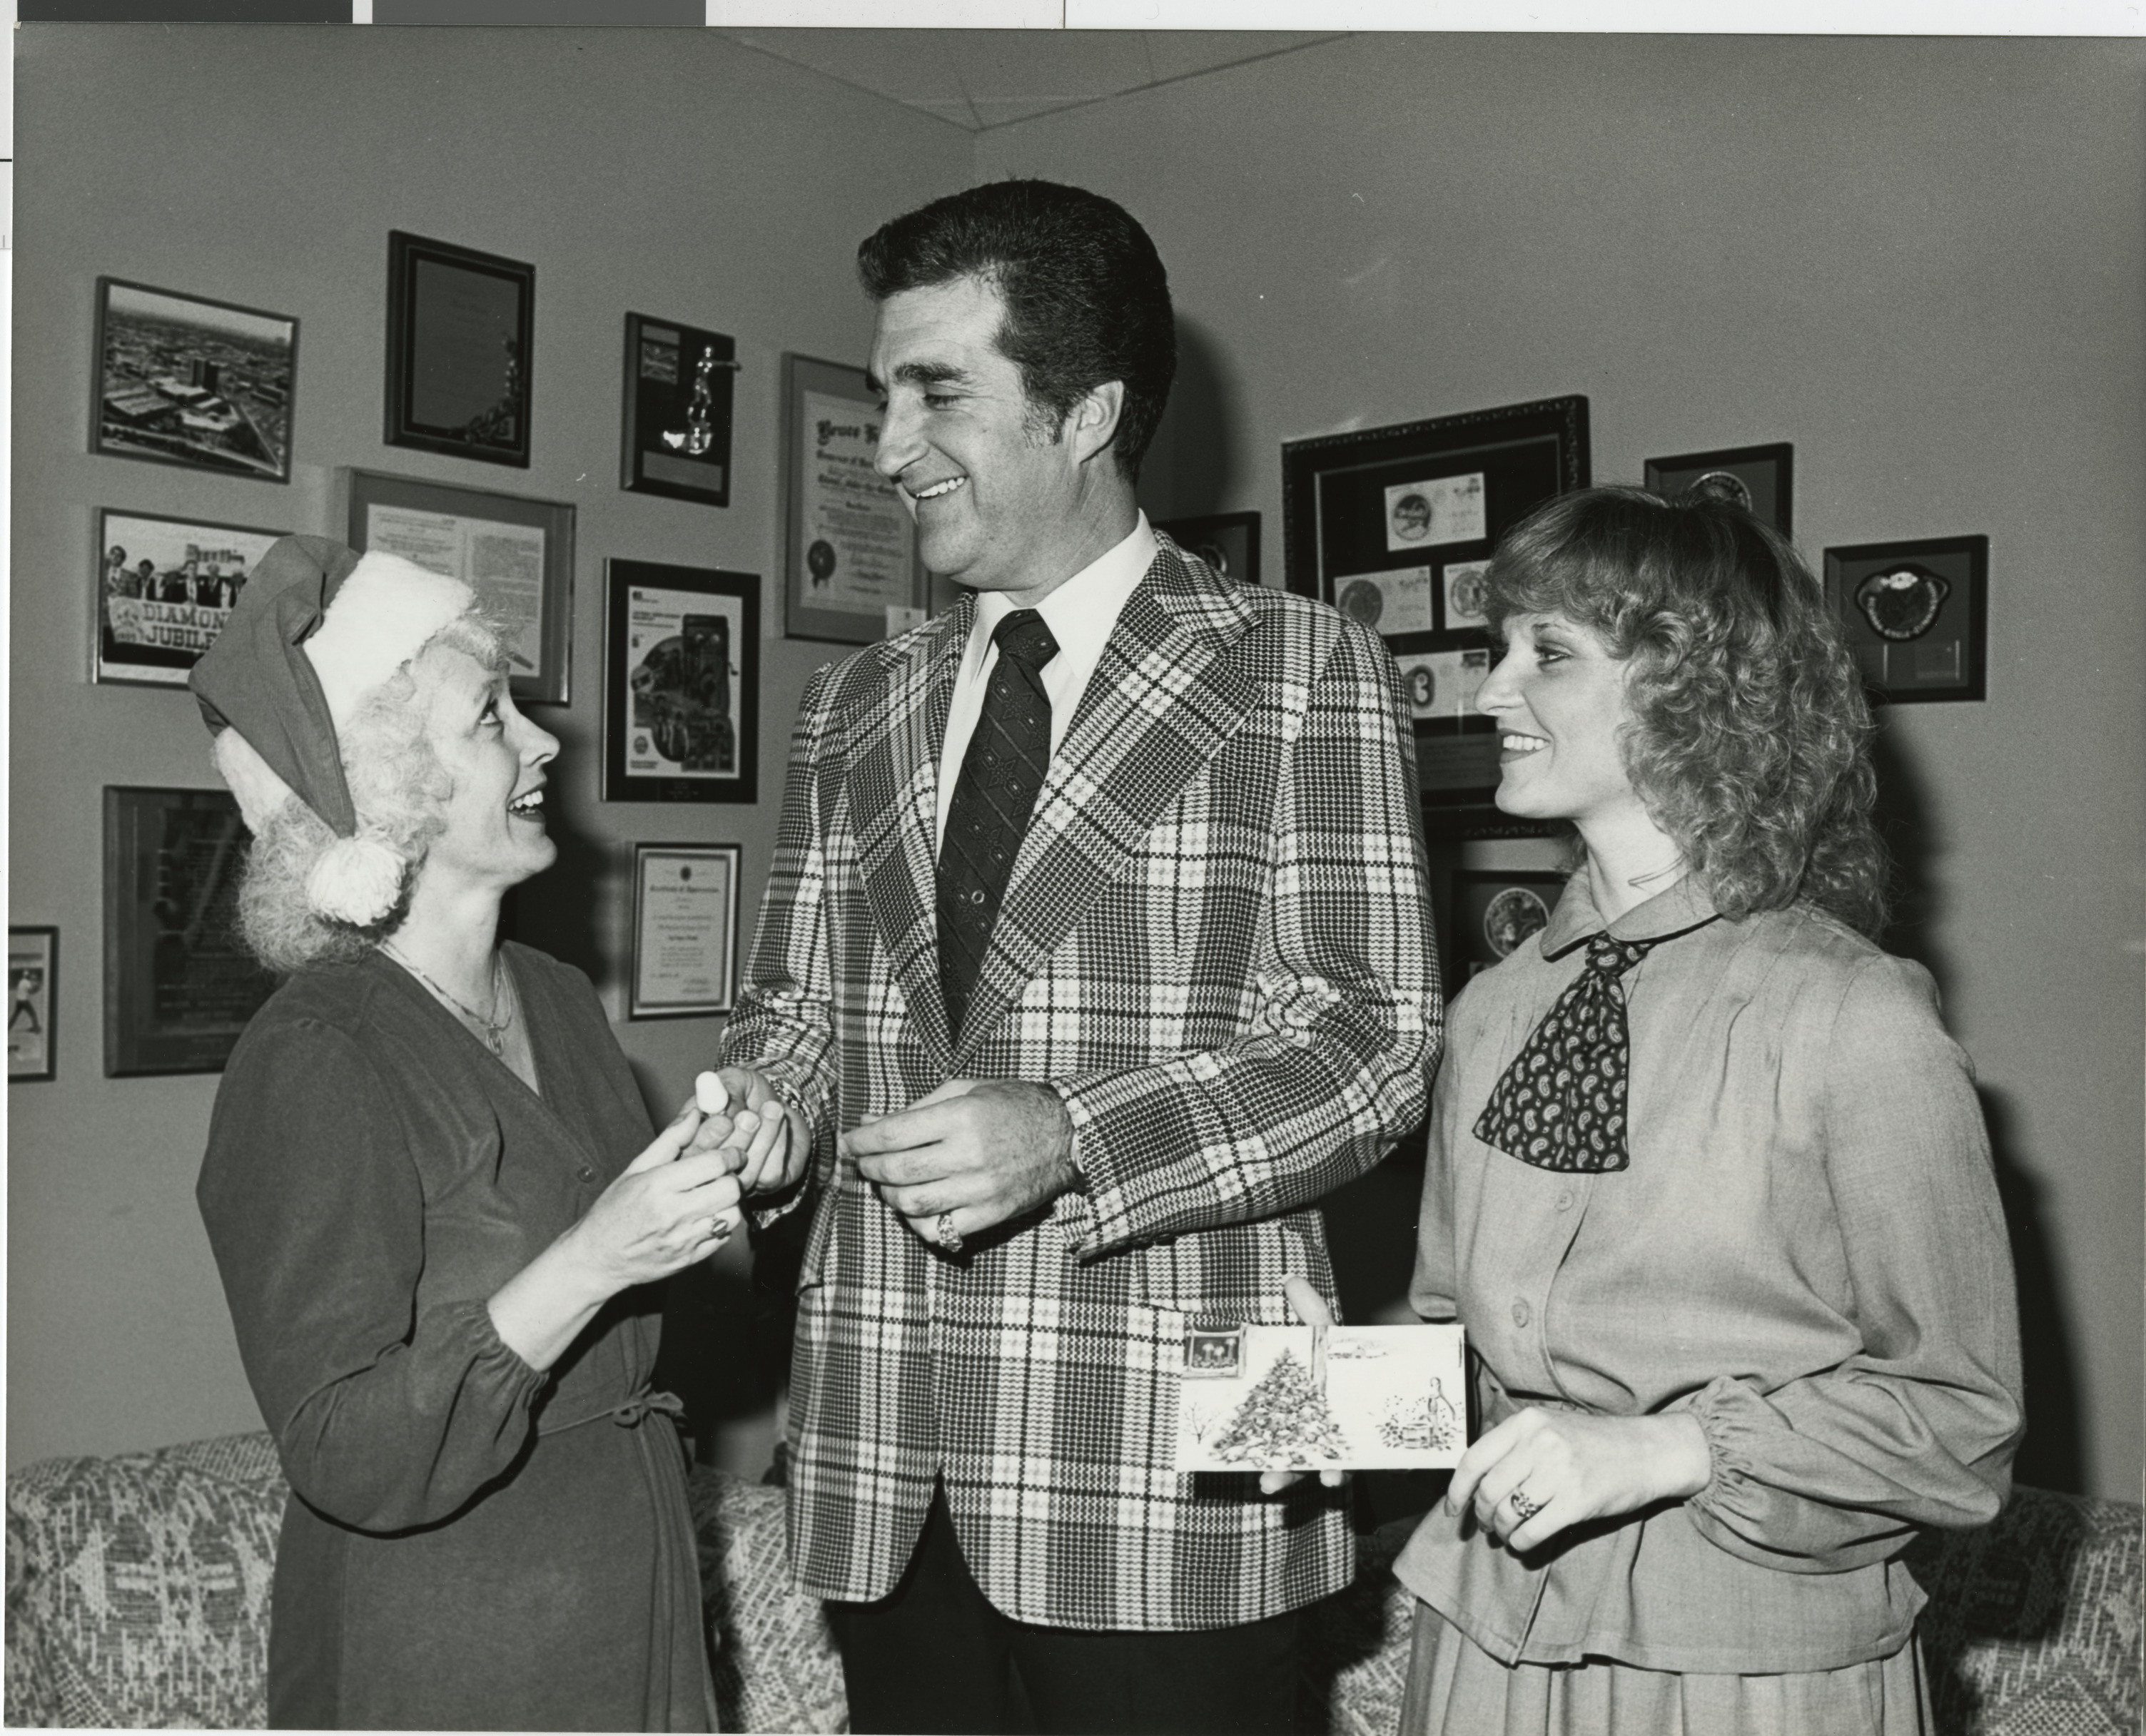 Photograph of Mary Coon, Ron Lurie and Sally Brinkman, November 17, 1982